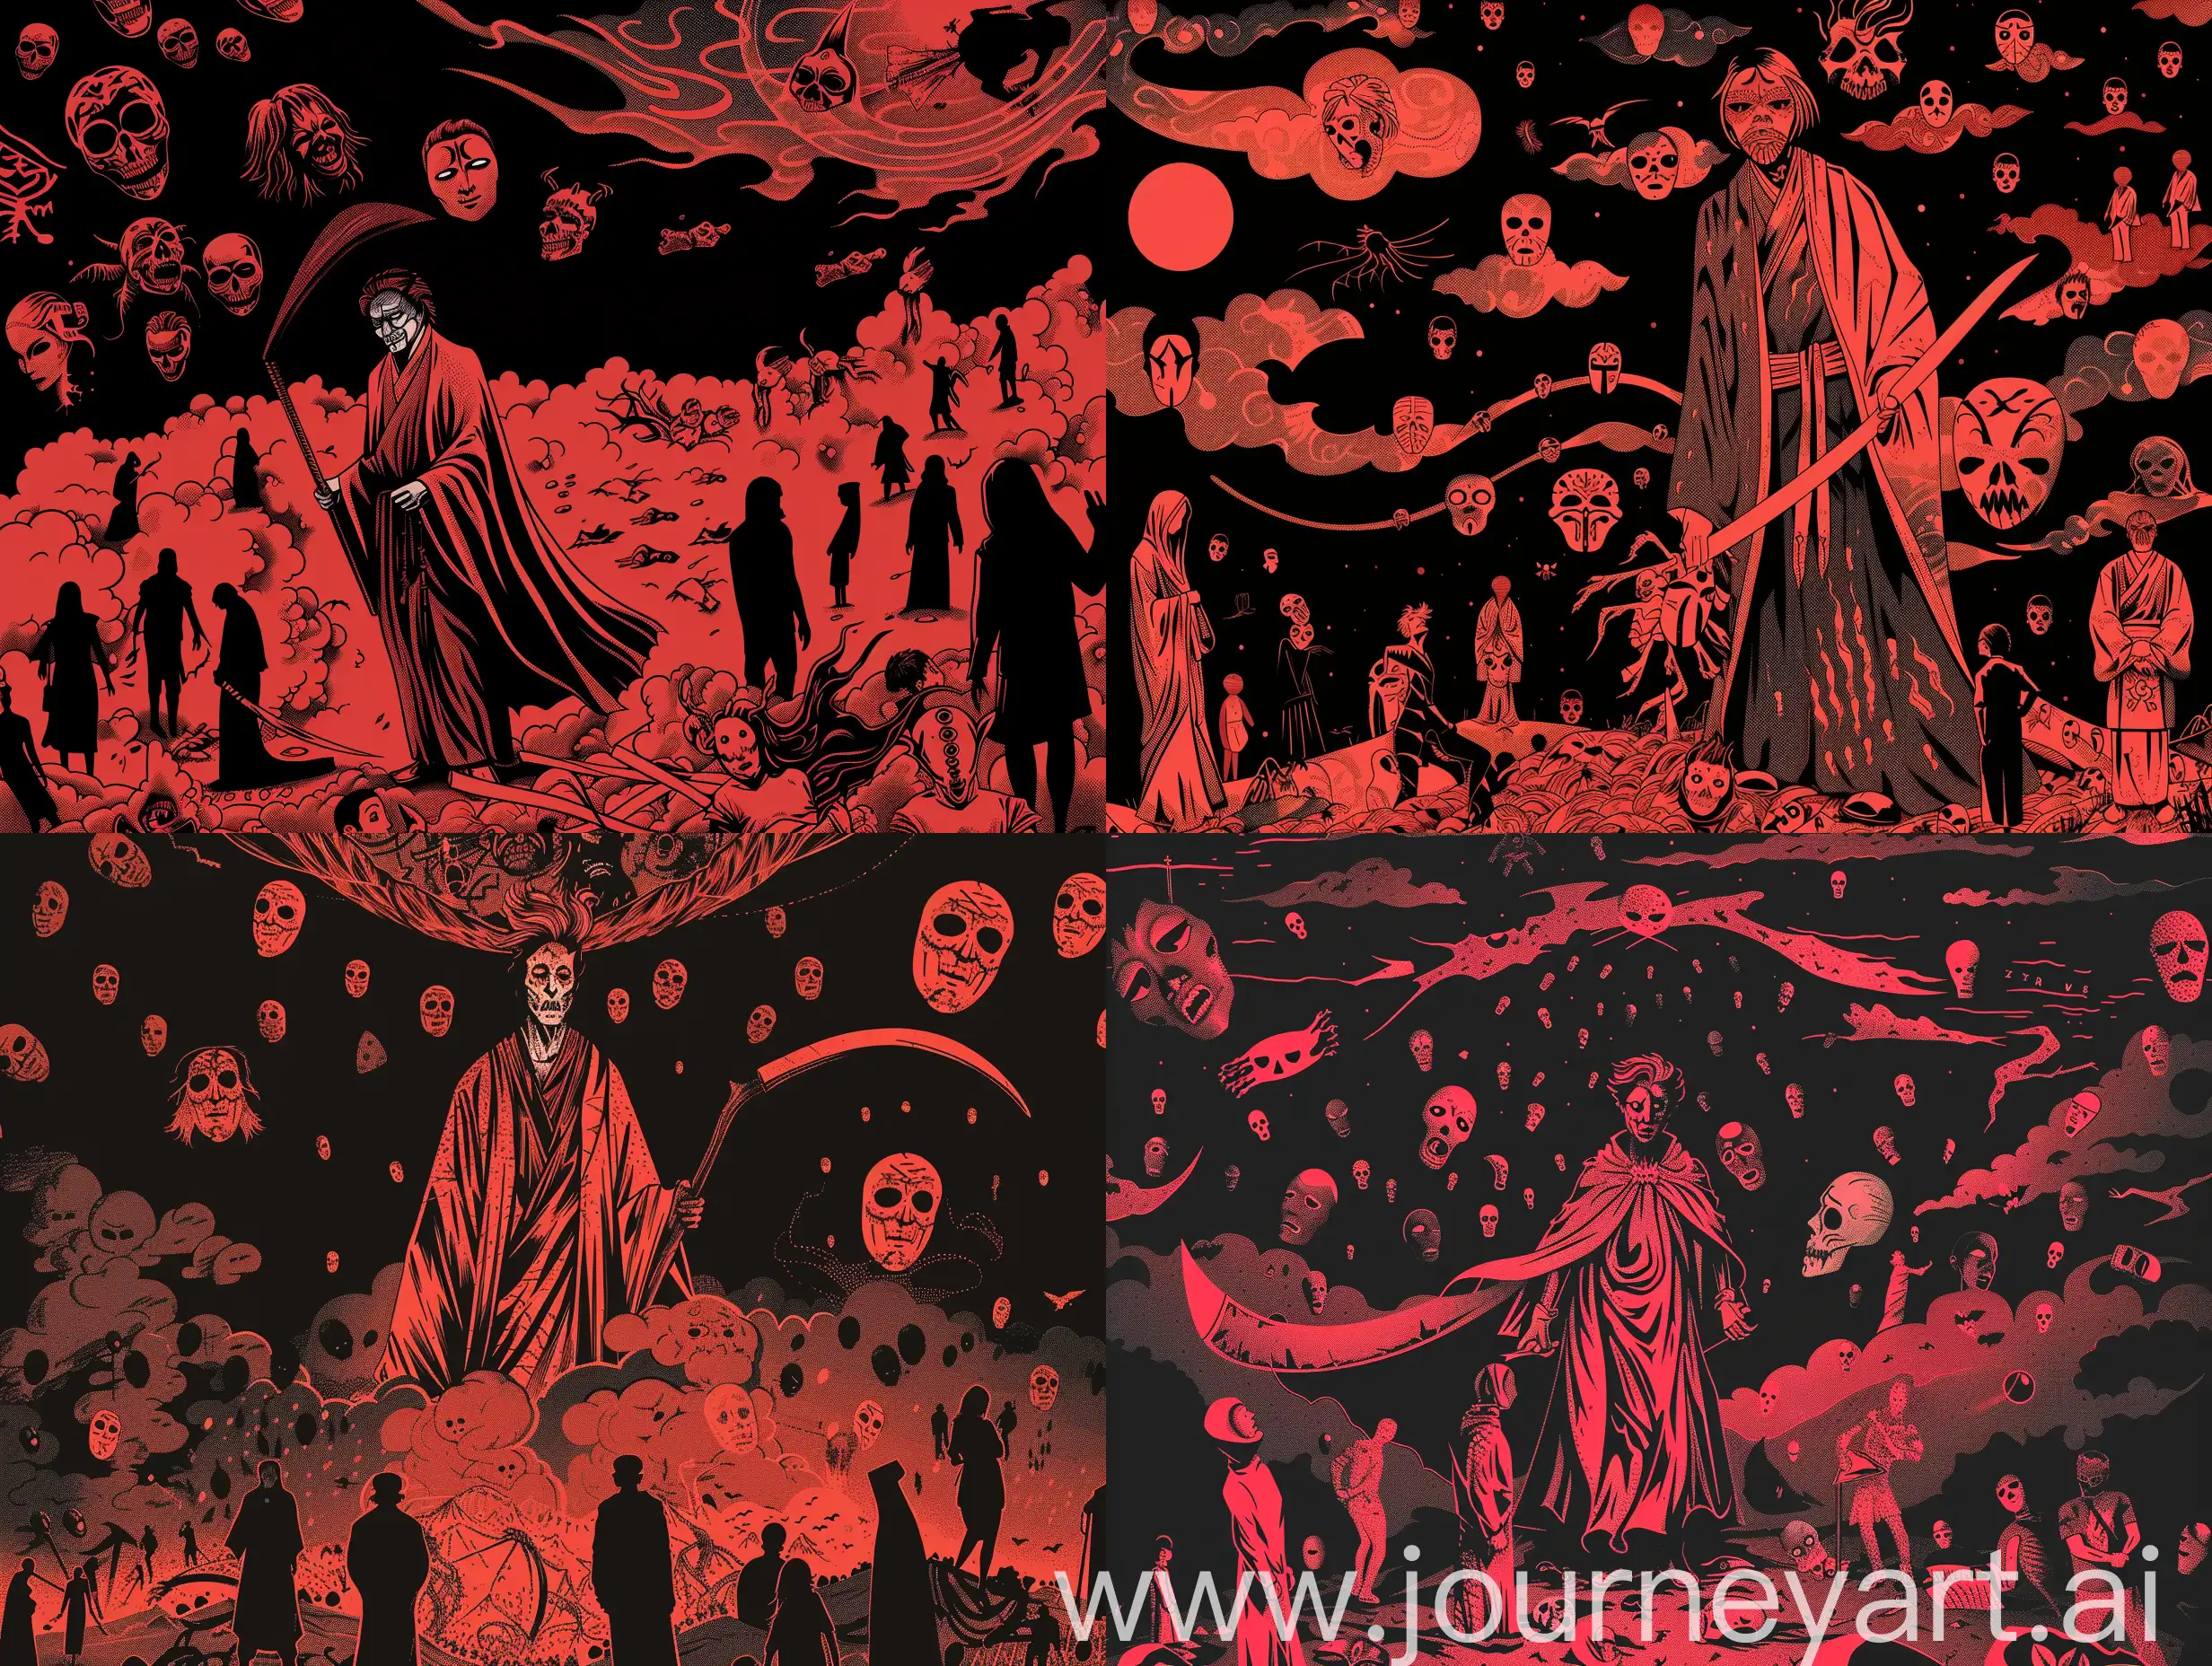 Azrael-Figure-Surrounded-by-Fallen-Masks-Surreal-Death-Scene-in-Red-and-Black-Tones